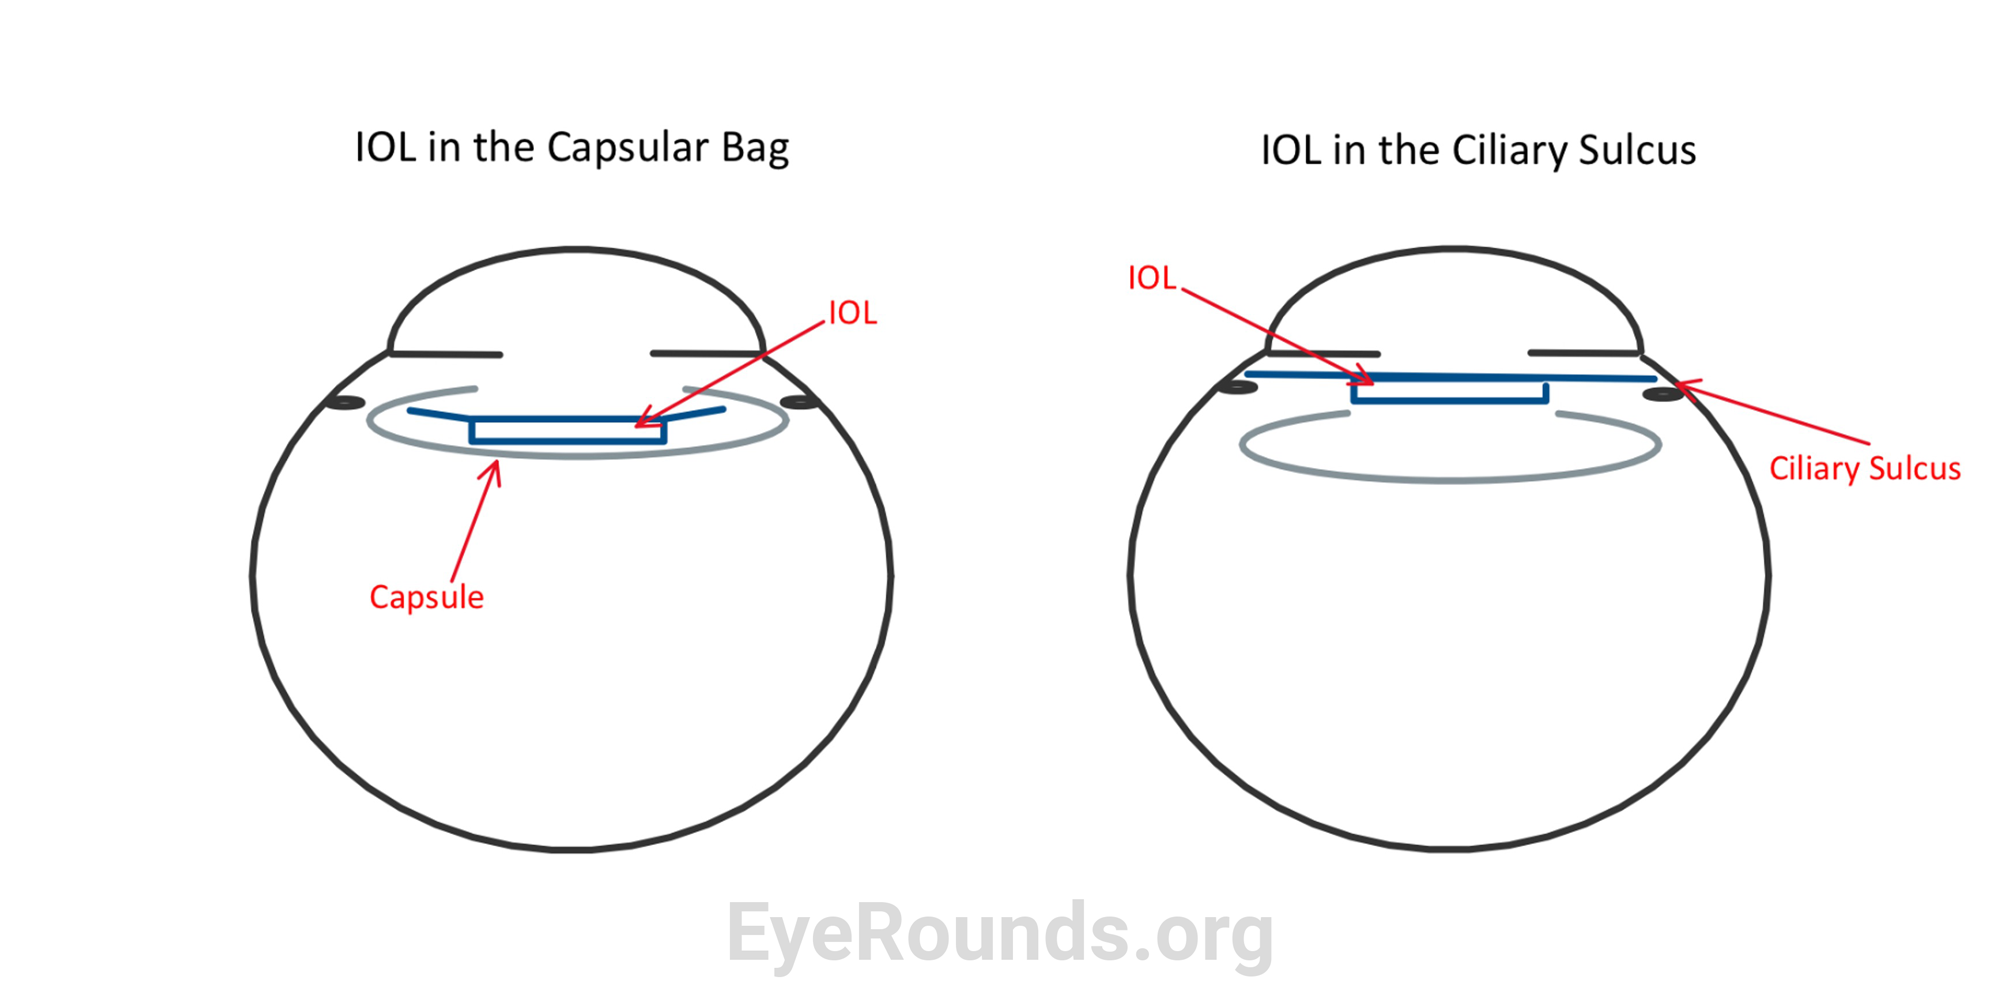 Pressurized capsular bag of intumescent white cataract can be challenging